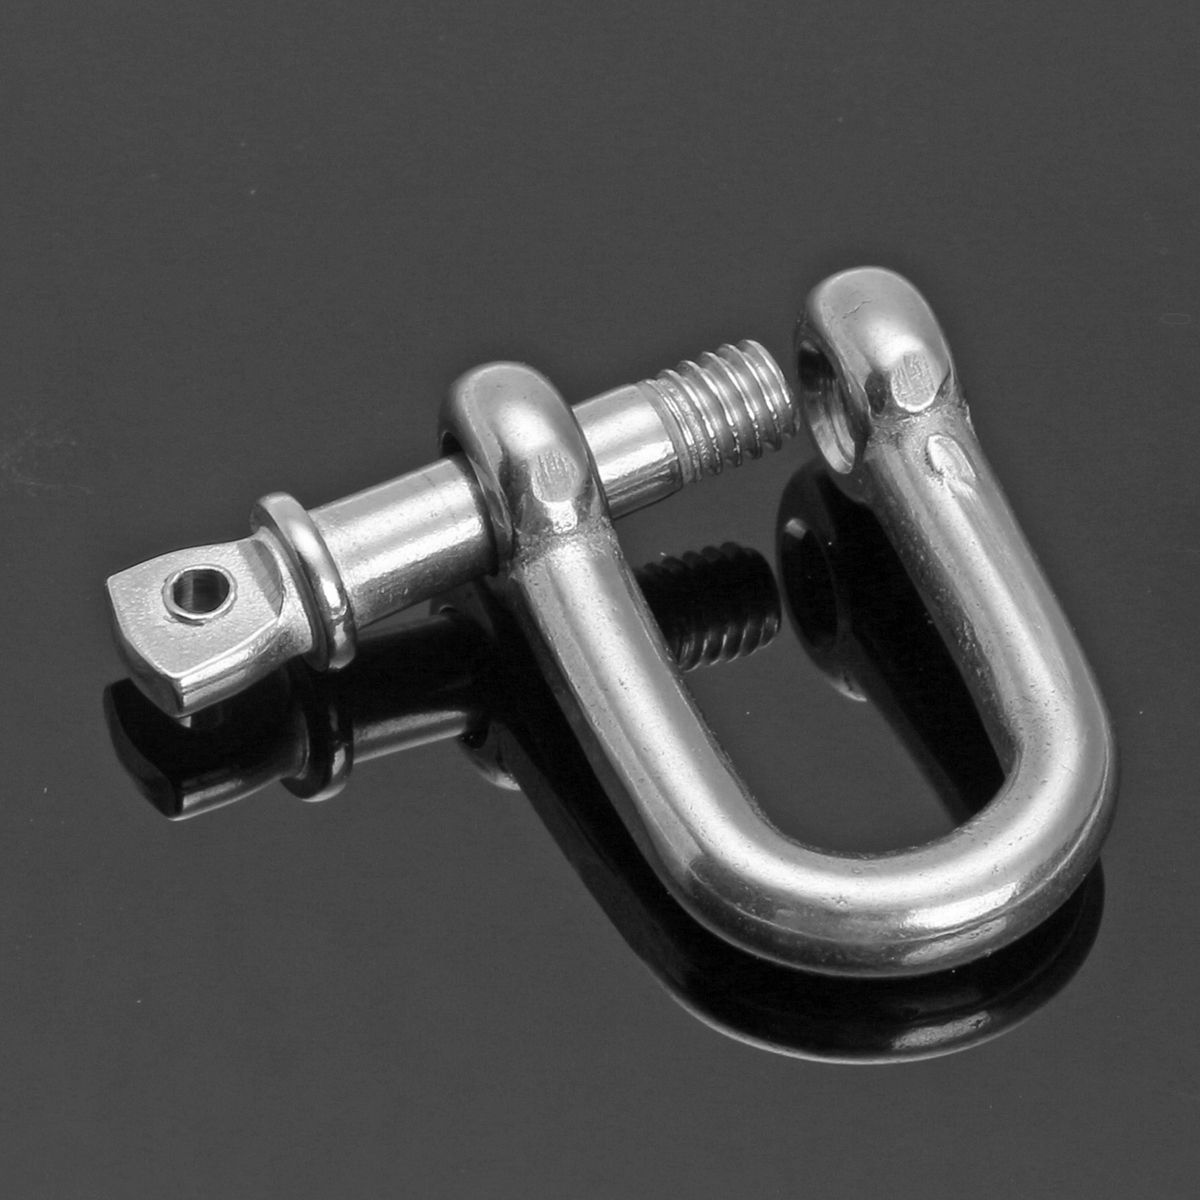 10Pcs-Stainless-Steel-316-D-Ring-Anchor-Shackle-Screw-Pin-for-Paracord-Bracelets-1297745